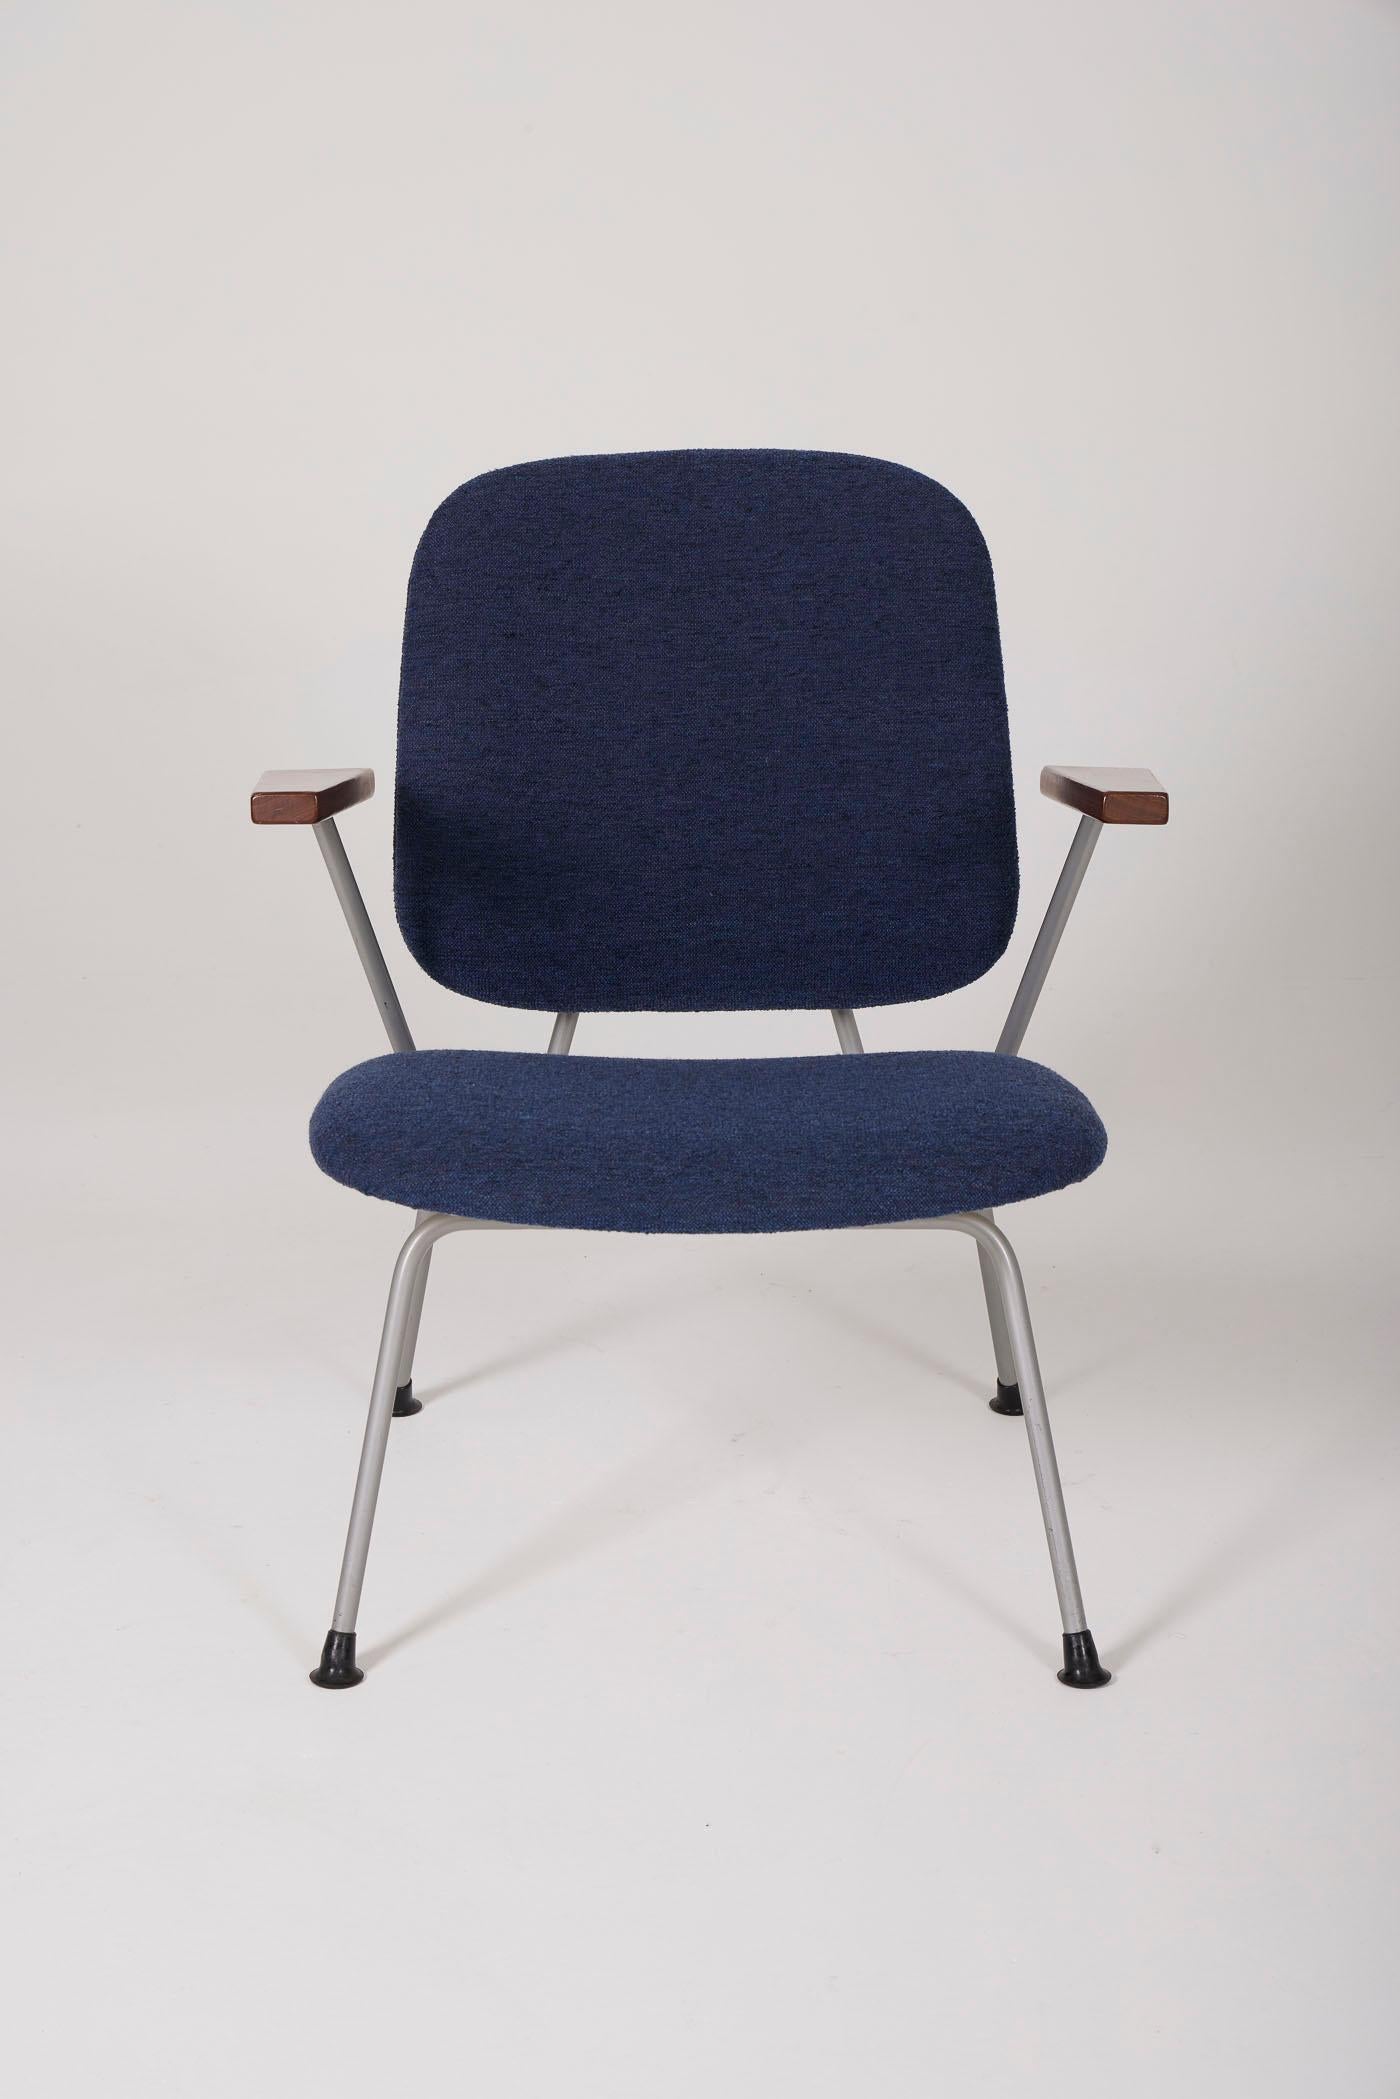 A pair of armchairs by Dutch designer Willem Hendrik Gispen, 1950s. The chairs are upholstered in blue fabric, with wooden armrests and a gray lacquered metal base. In perfect condition.
DV442